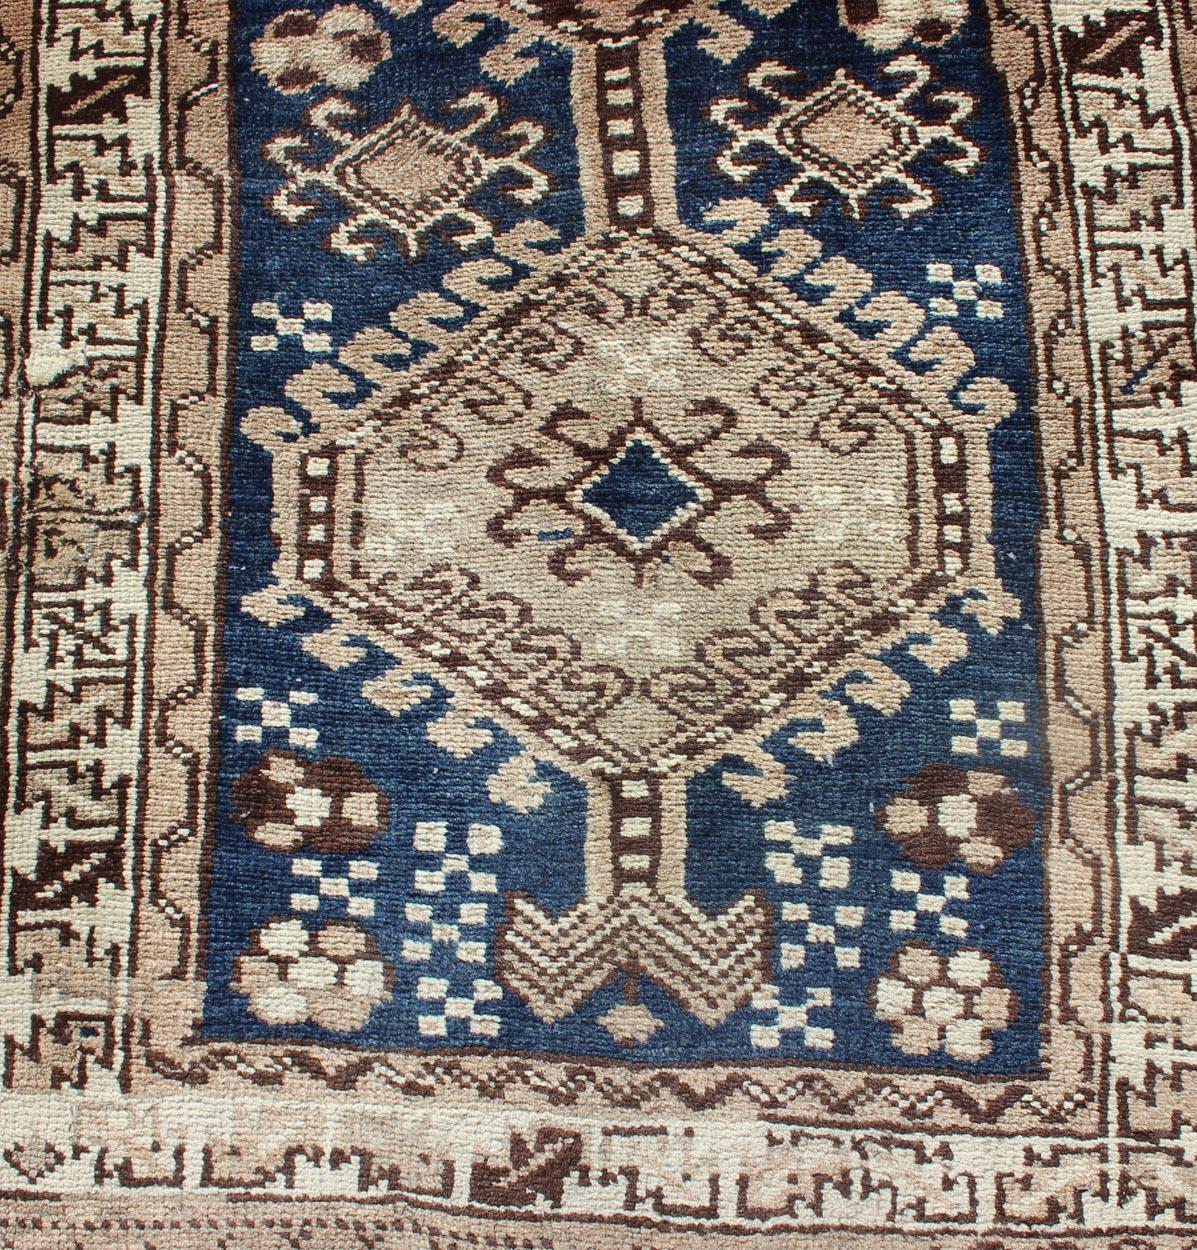 Wool Antique Blue Tribal Karajeh Runner With Navy Blue, Brown and Earth Tones For Sale